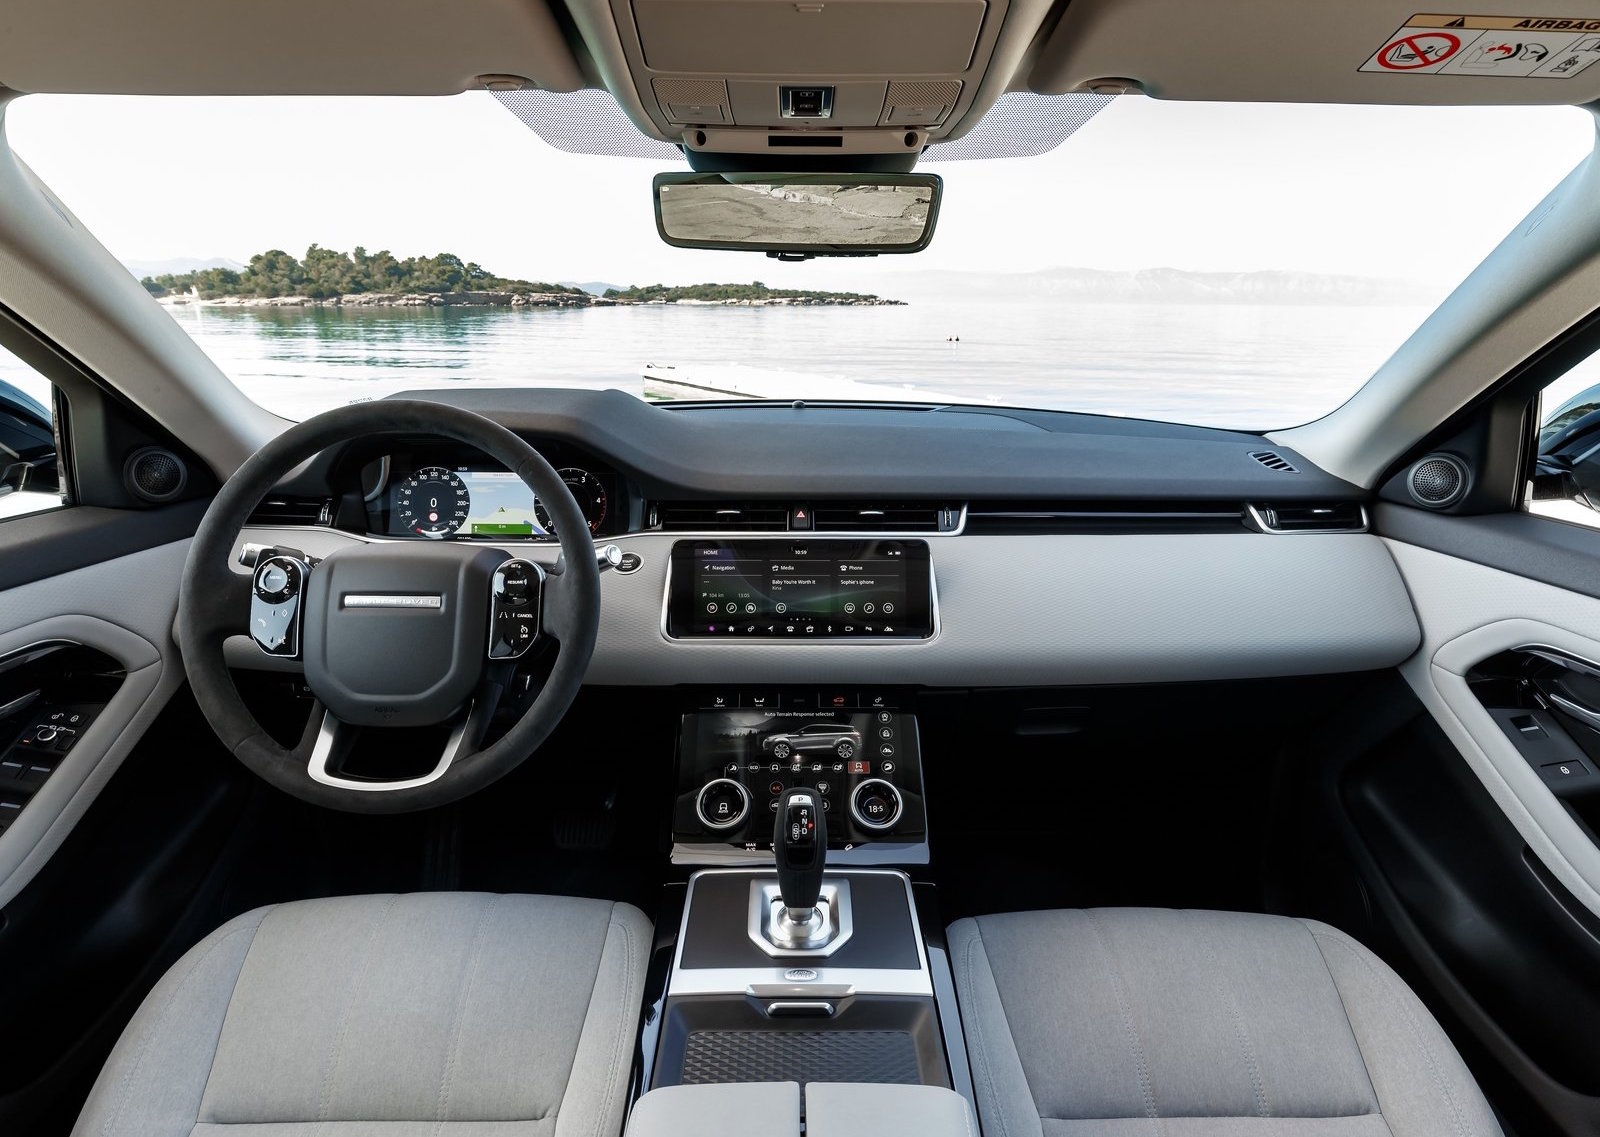 Inside The Range Rover Evoque 2019  : The Driver�s Instruments Are Actual Hardware Items, Where It�s.